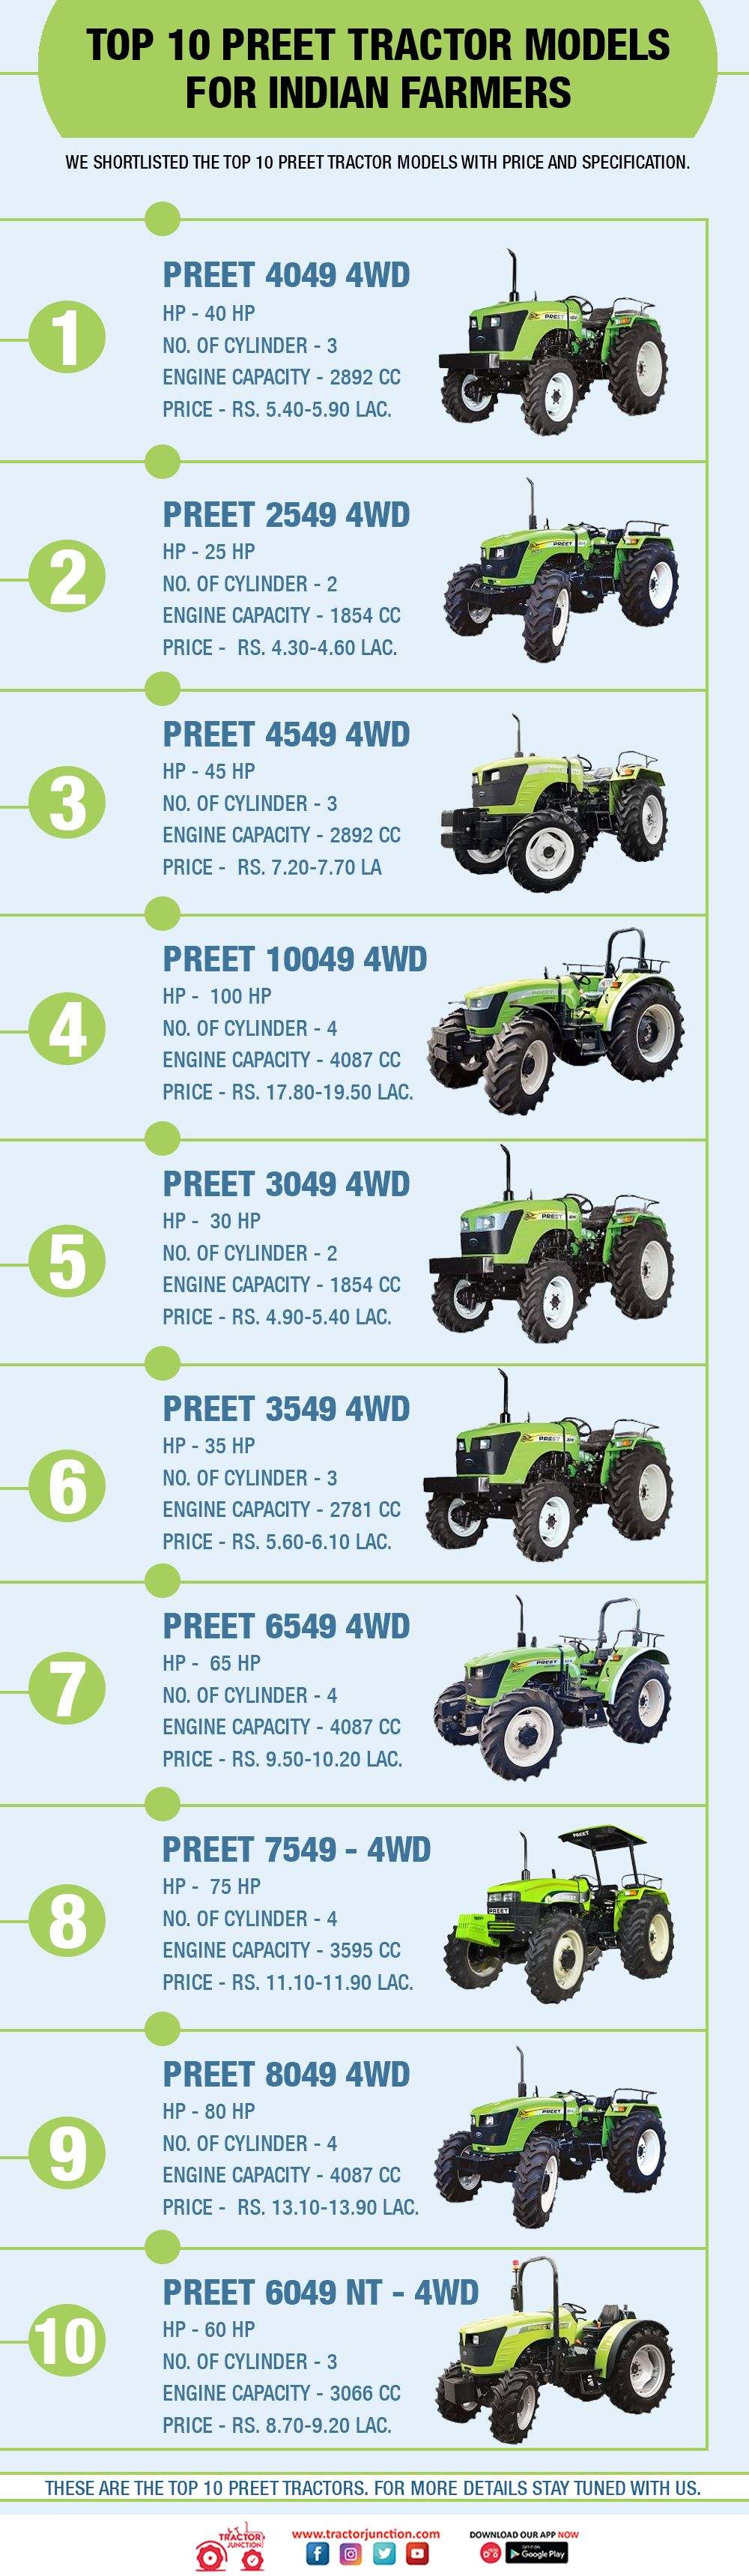 Top 10 Preet Tractor Models for Indian Farmers- Infographic 